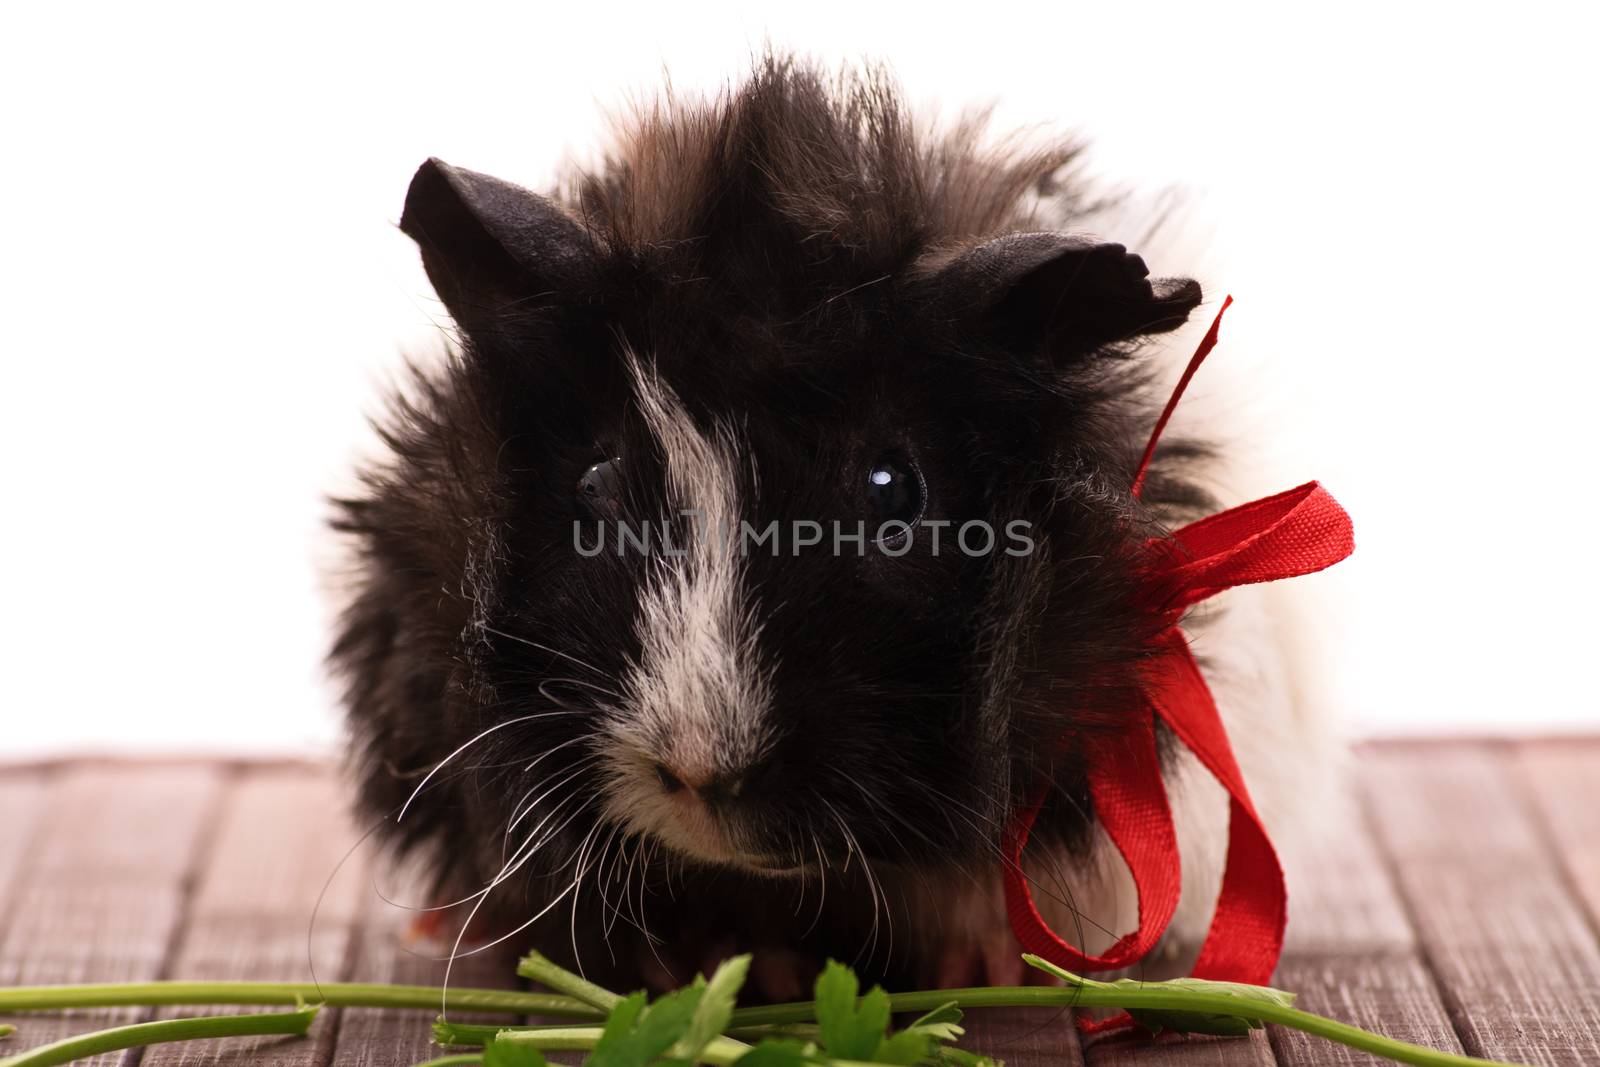 A close up shot of a cute guinea pig eating parsley, isolated on white background.